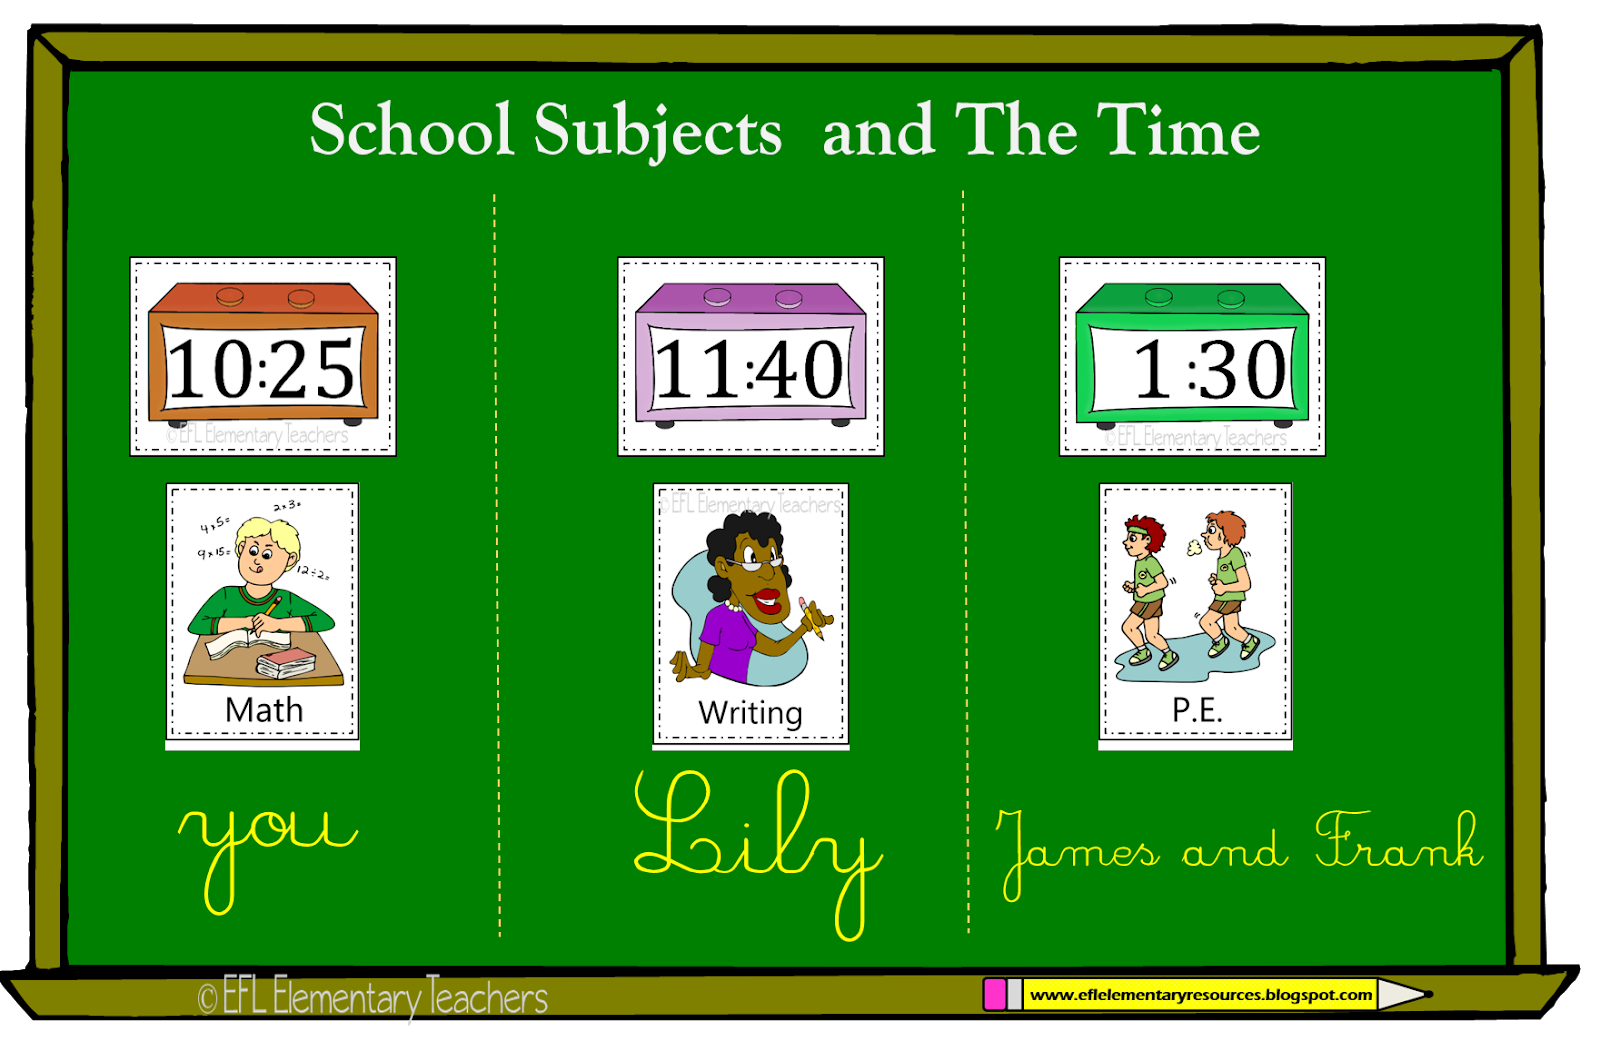 Write school subjects. School subjects. School subjects Flashcards. Time Flashcards. Flashcards for time.